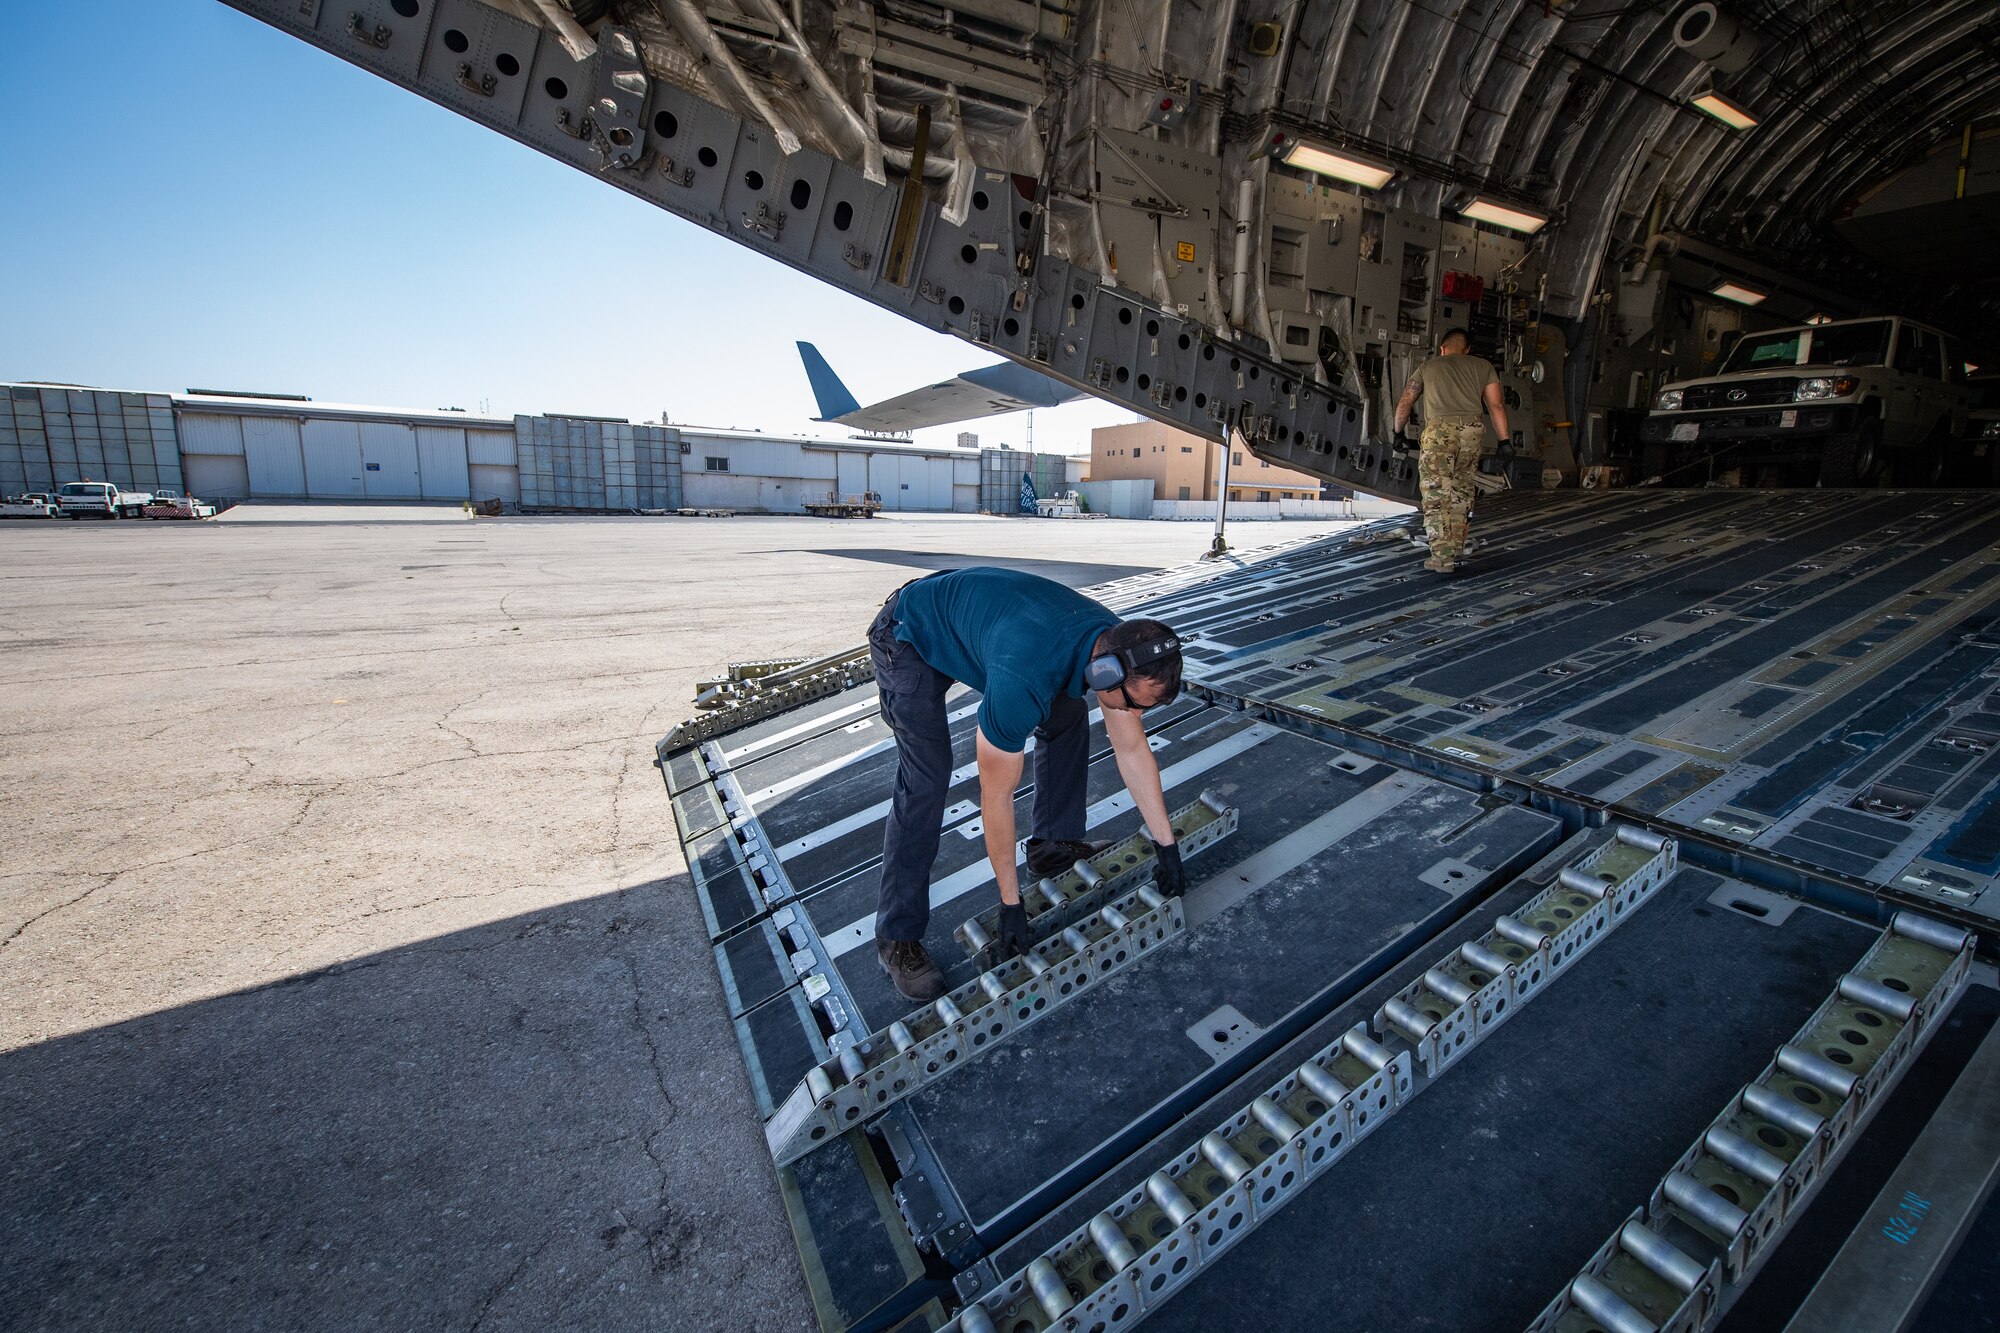 Staff Sgt. Tony Bellow, NCO-in-charge of Cargo Operations, Jordan Port, 387th Air Expeditionary Squadron, removes rollers from the cargo ramp of a U.S. Air Force C-17 Globemaster III before unloading vehicles in Jordan, Oct. 14, 2019. The port provides aerial logistics for the American Embassy to Jordan through the Military Assistance Program, handling cargo and passenger movement in support of State Department efforts.